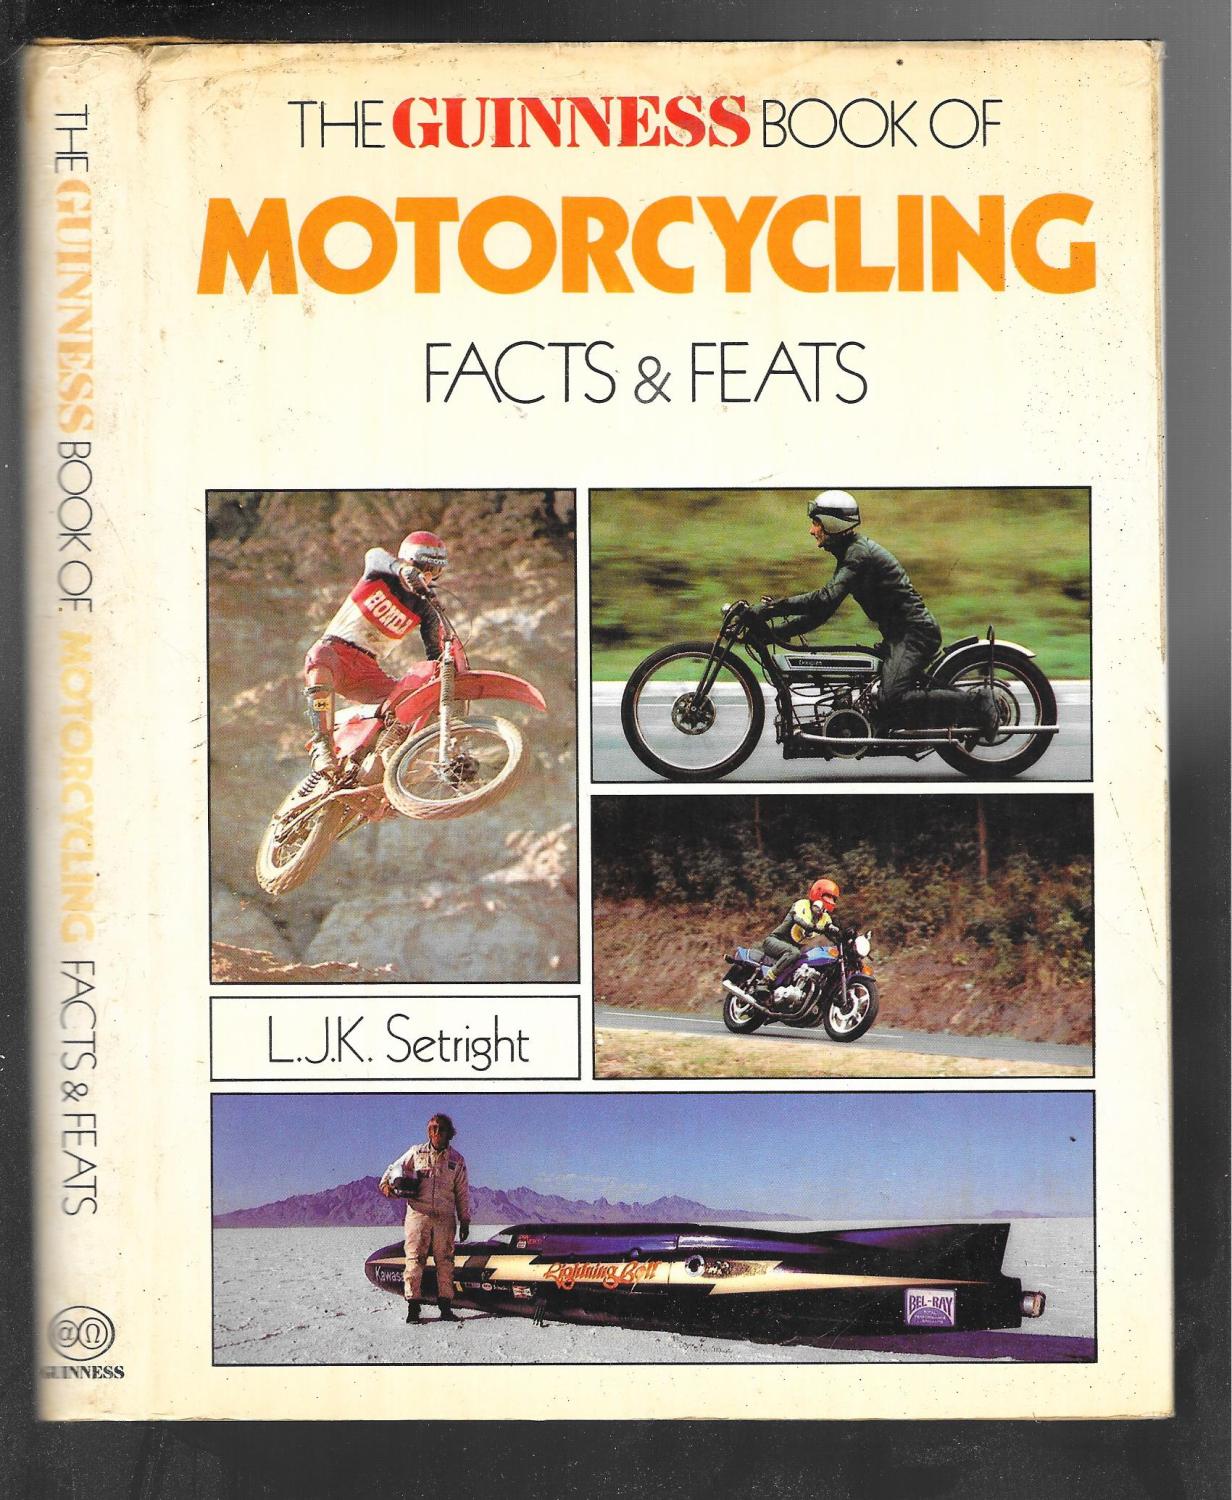 Guinness Book of Motorcycling Facts and Feats